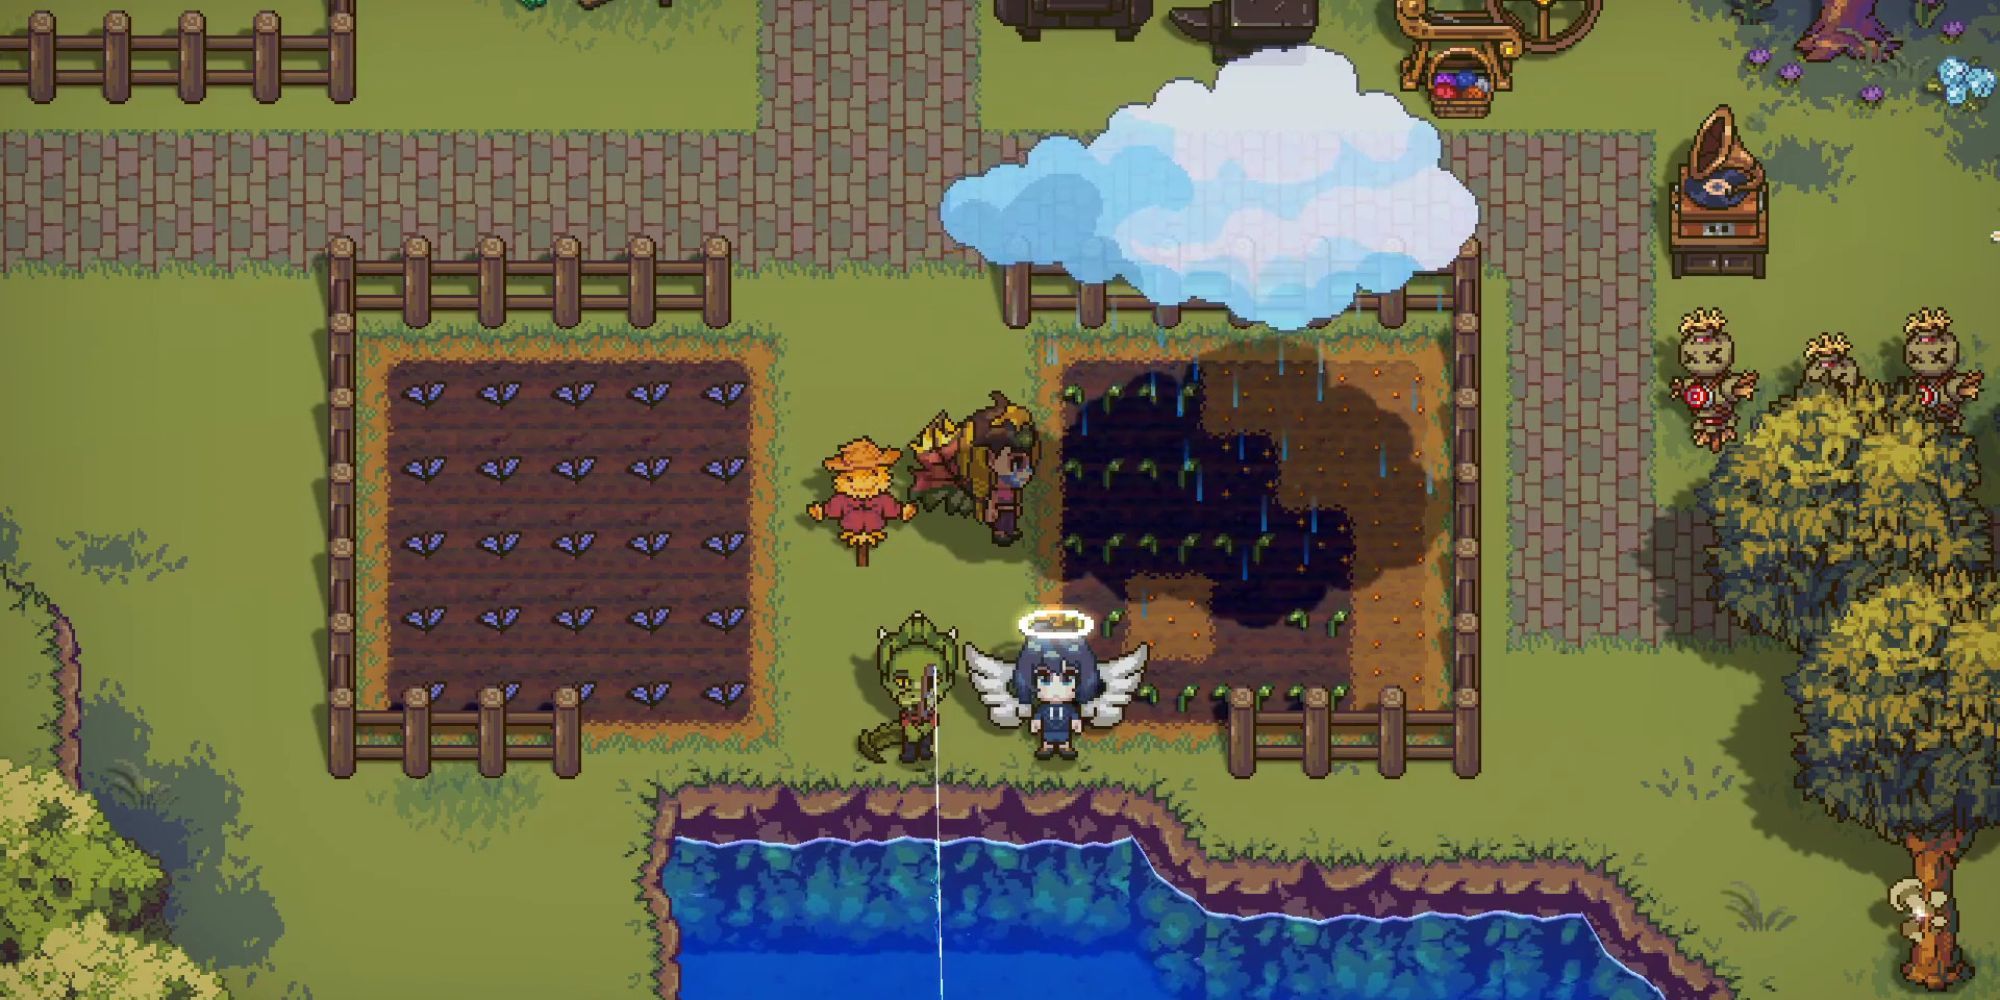 A player using a raincloud to water crops in Sun Haven while two other player fish nearby